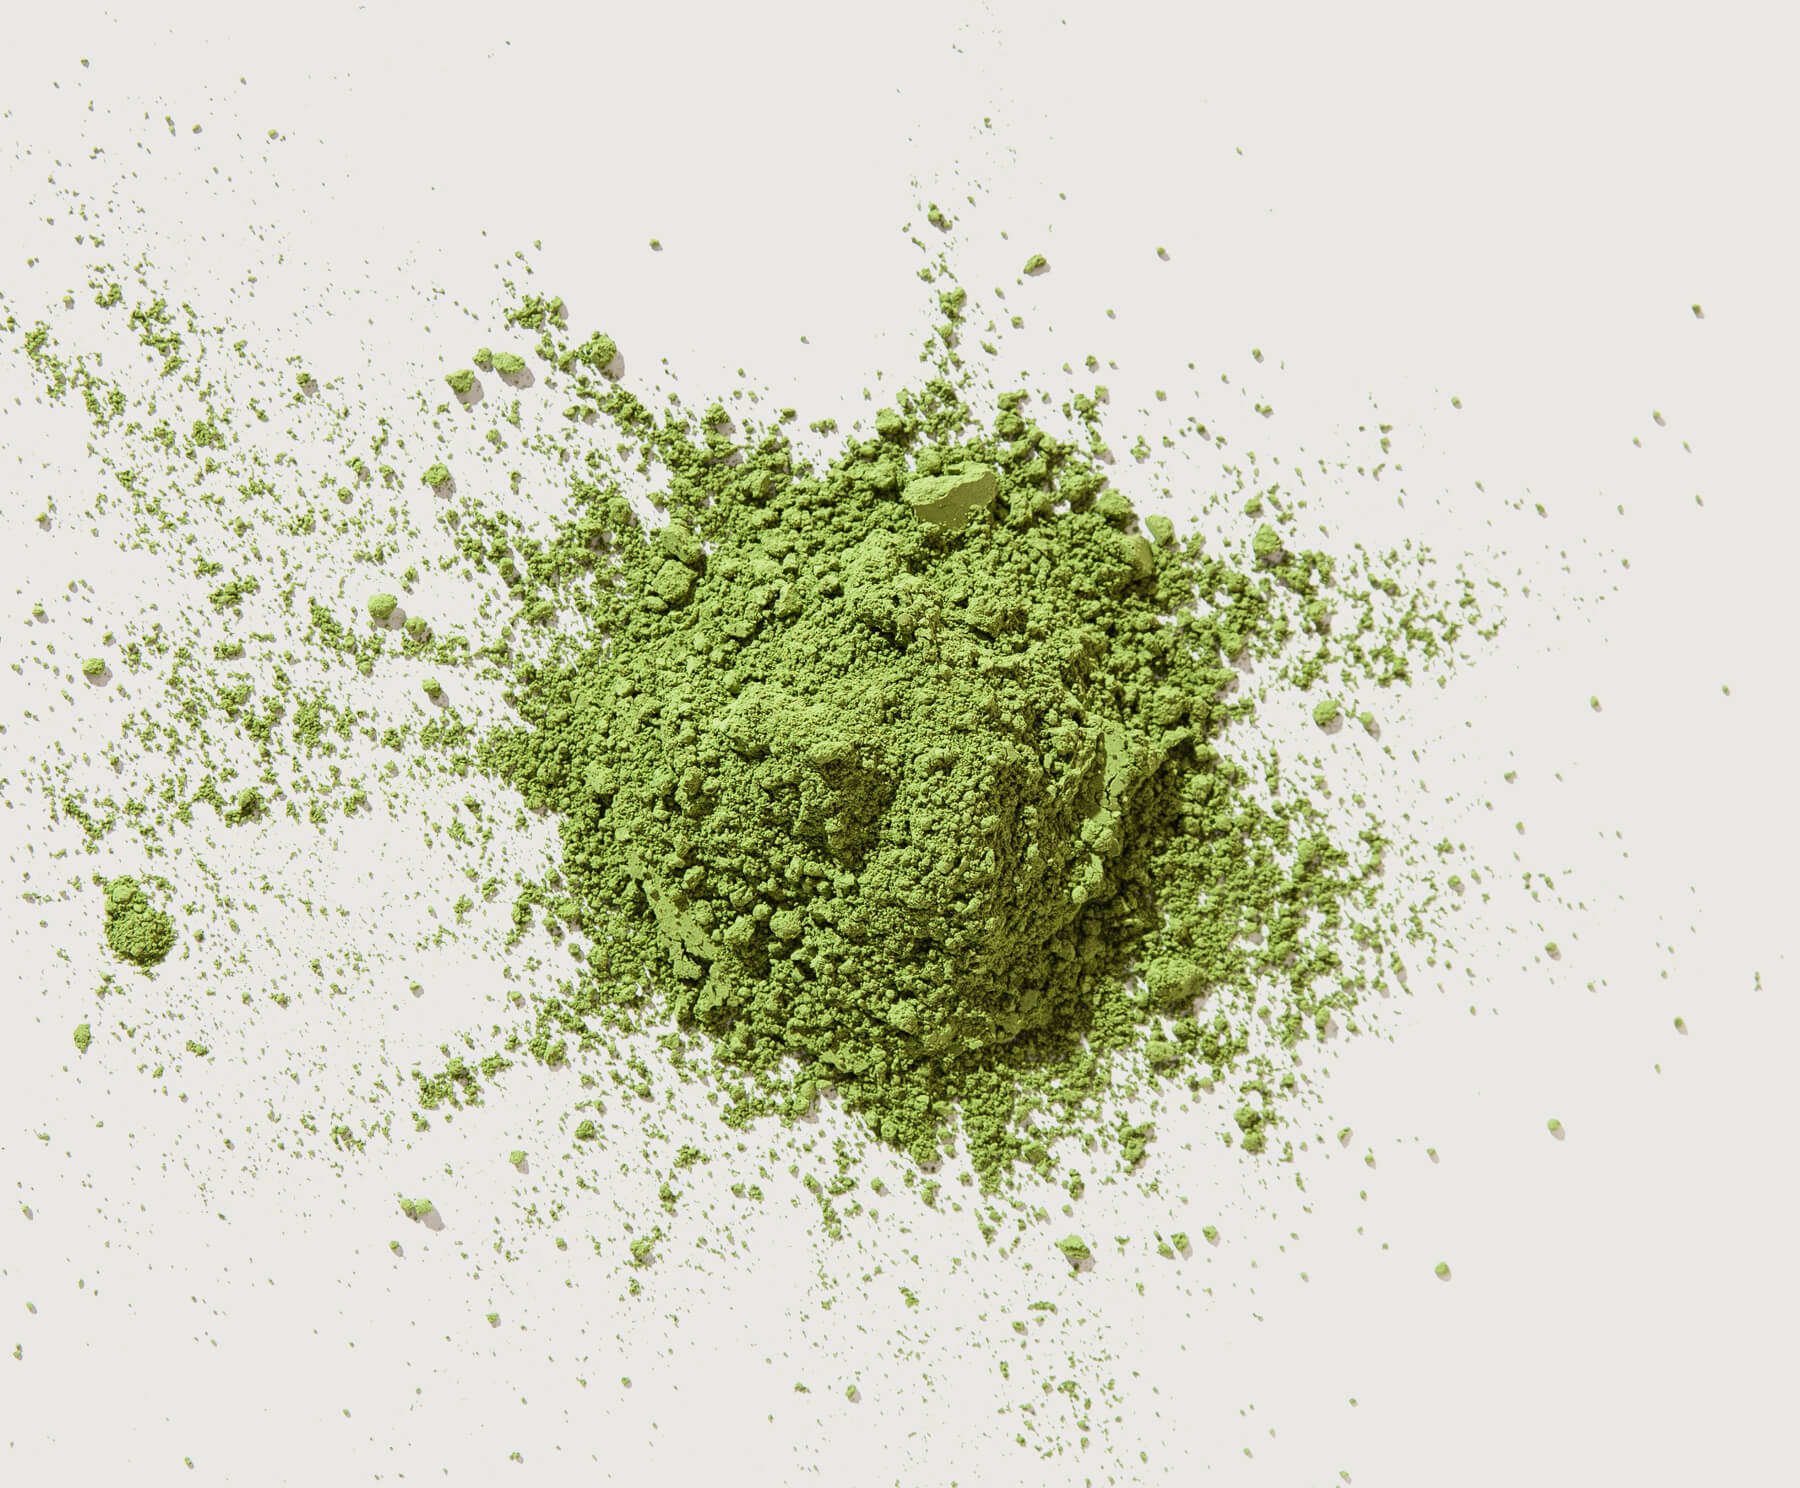 Get Your Green On With Matcha88 | Dieline - Design, Branding ...